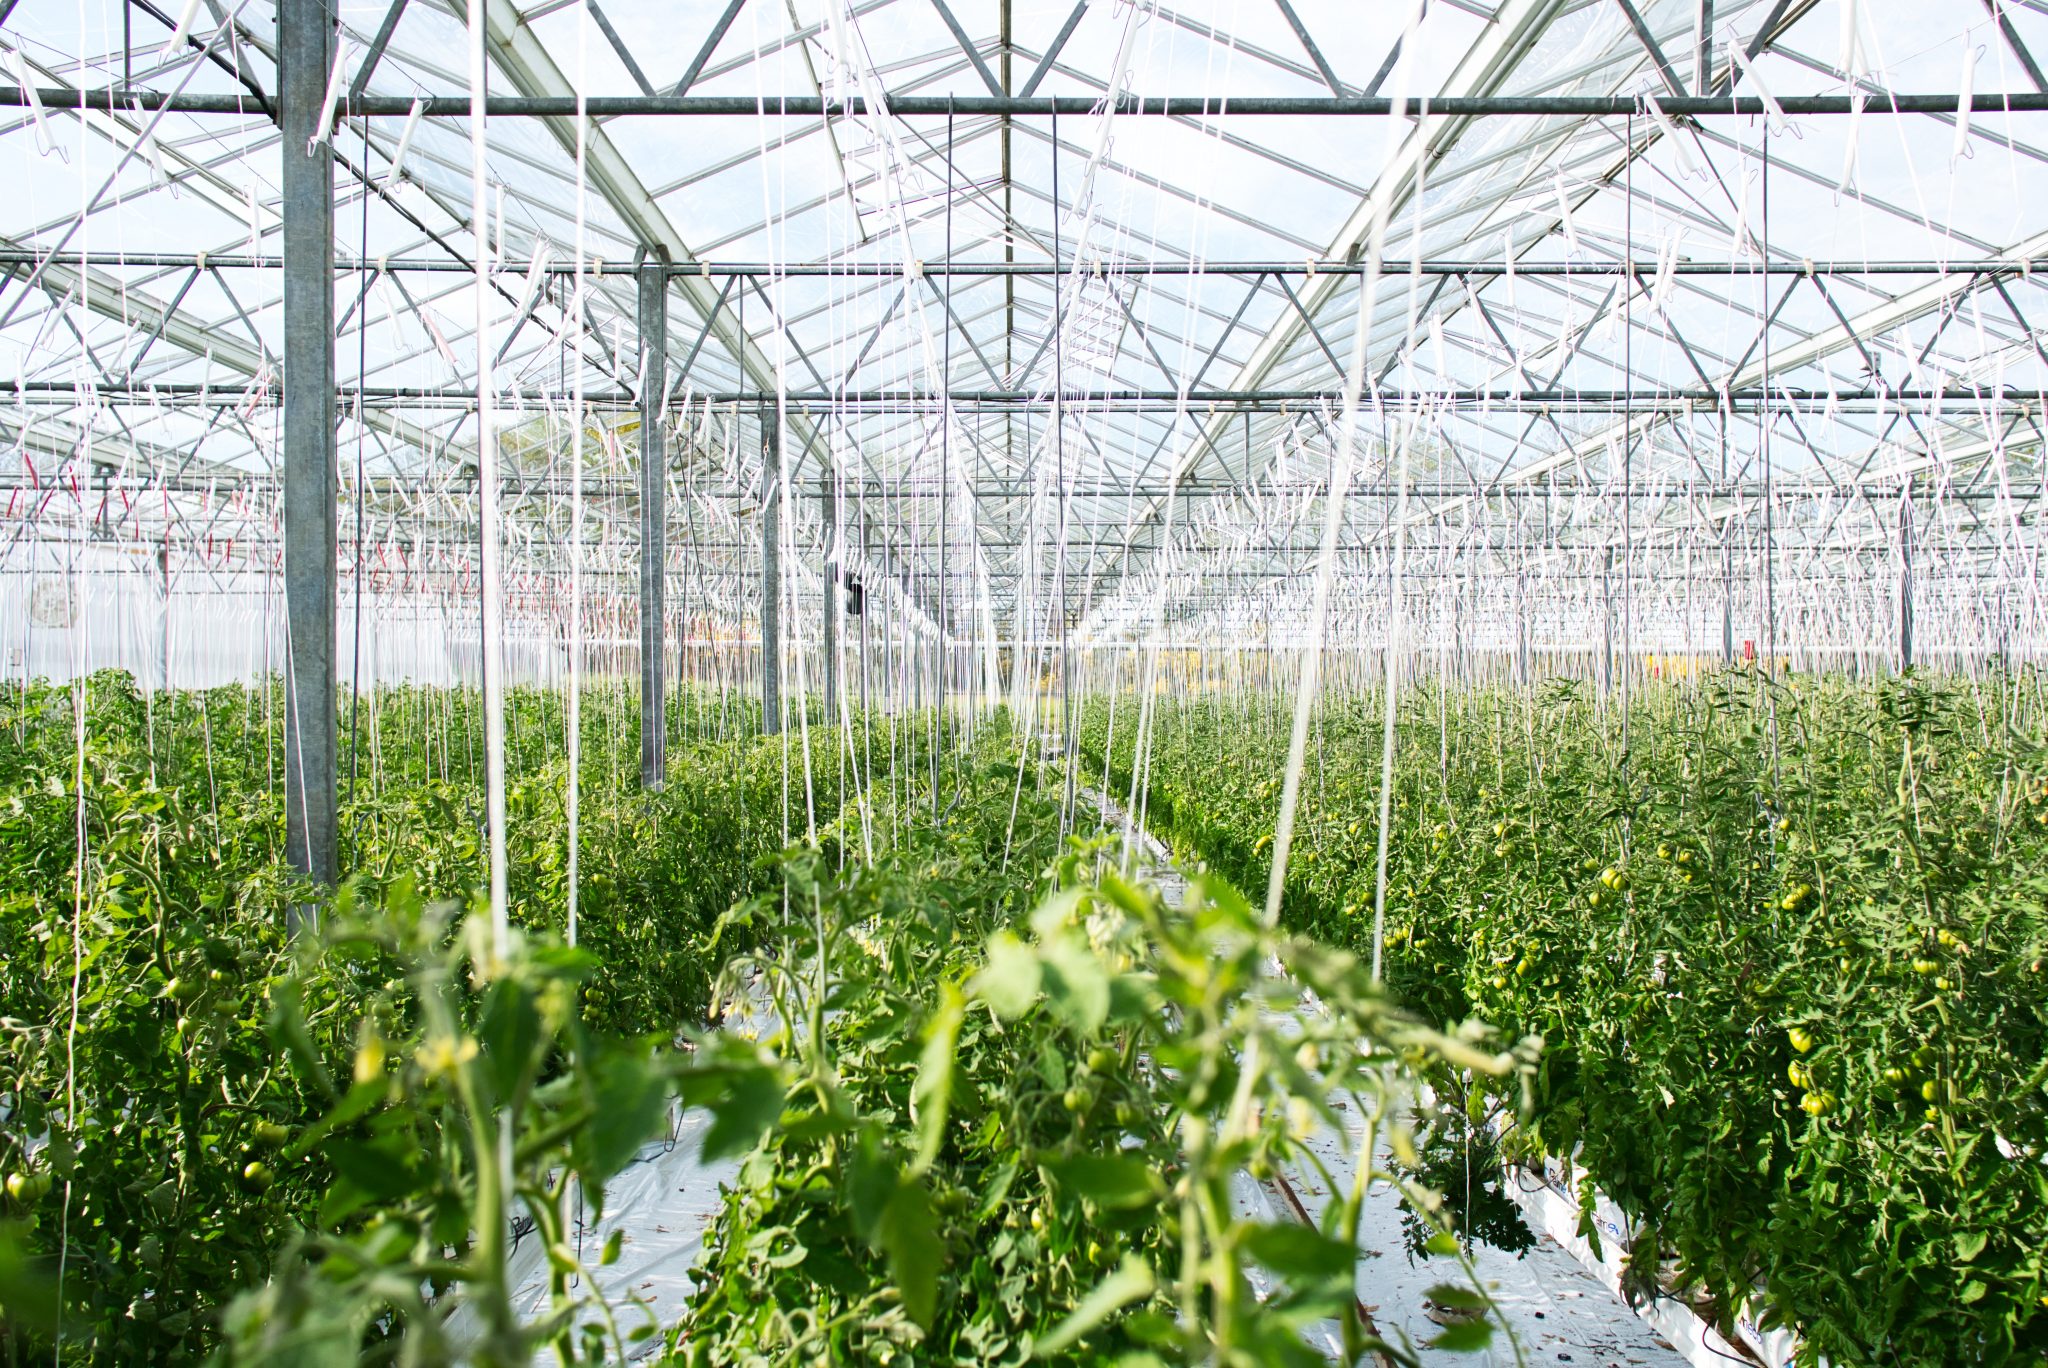 How to set up a greenhouse management system for cannabis